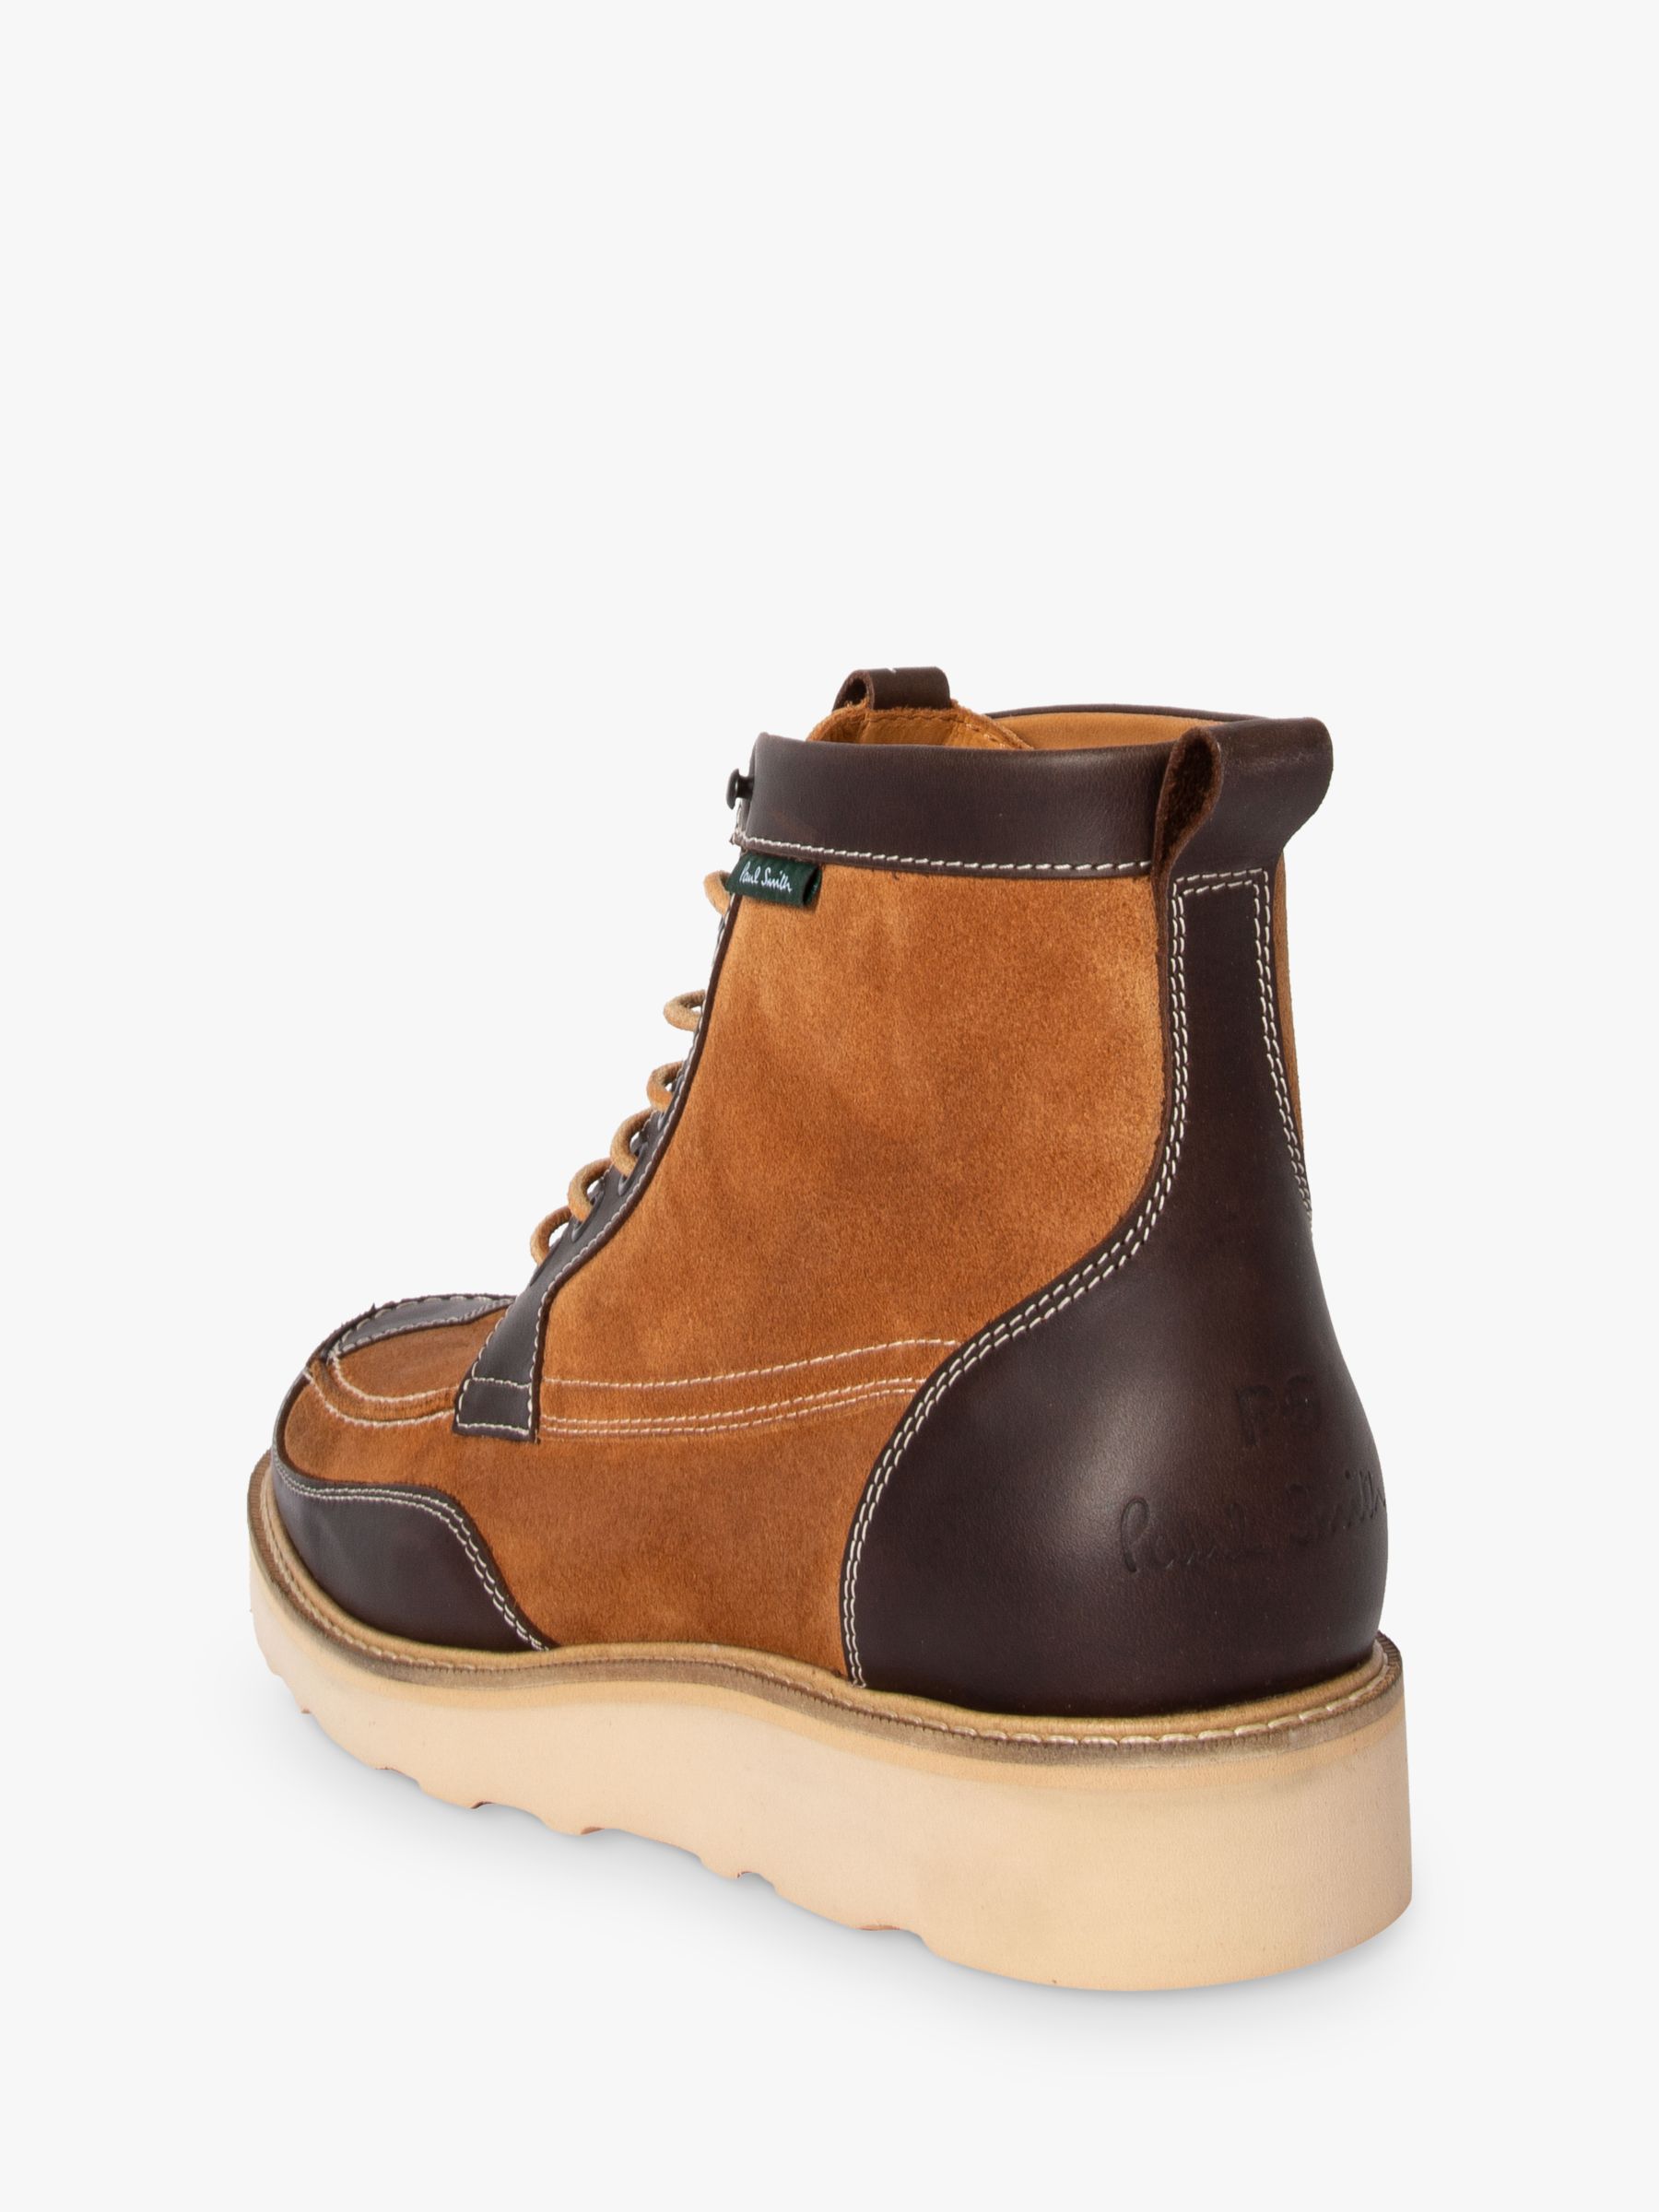 Paul Smith Tufnel Suede Ankle Boots,Tan